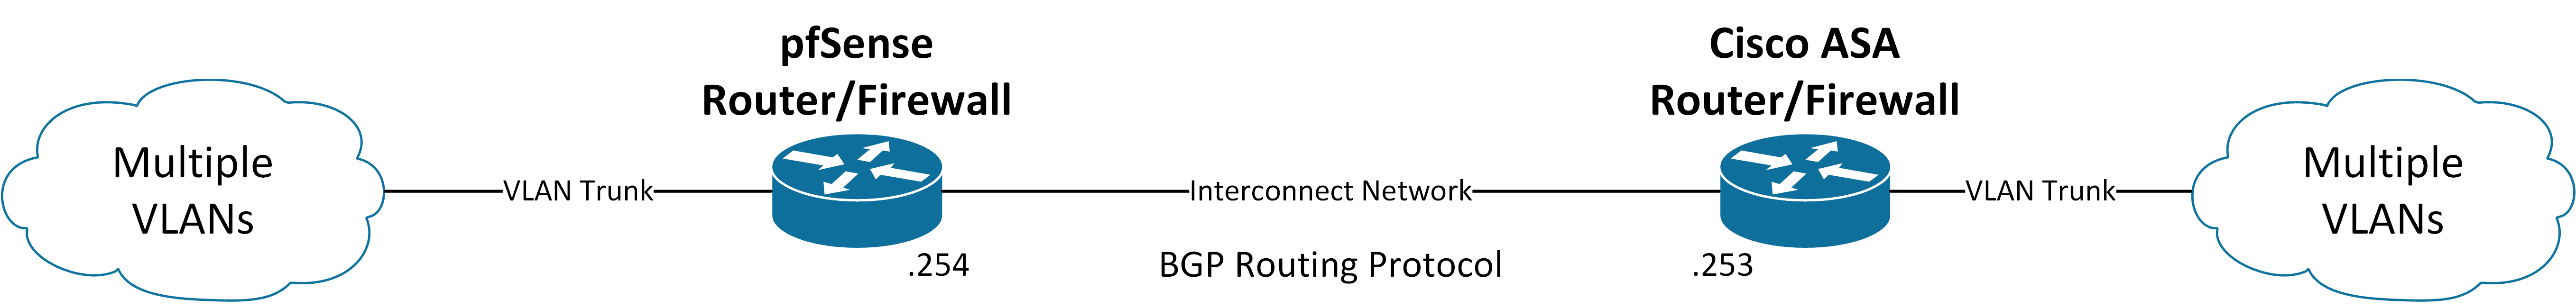 Basic Network Overview